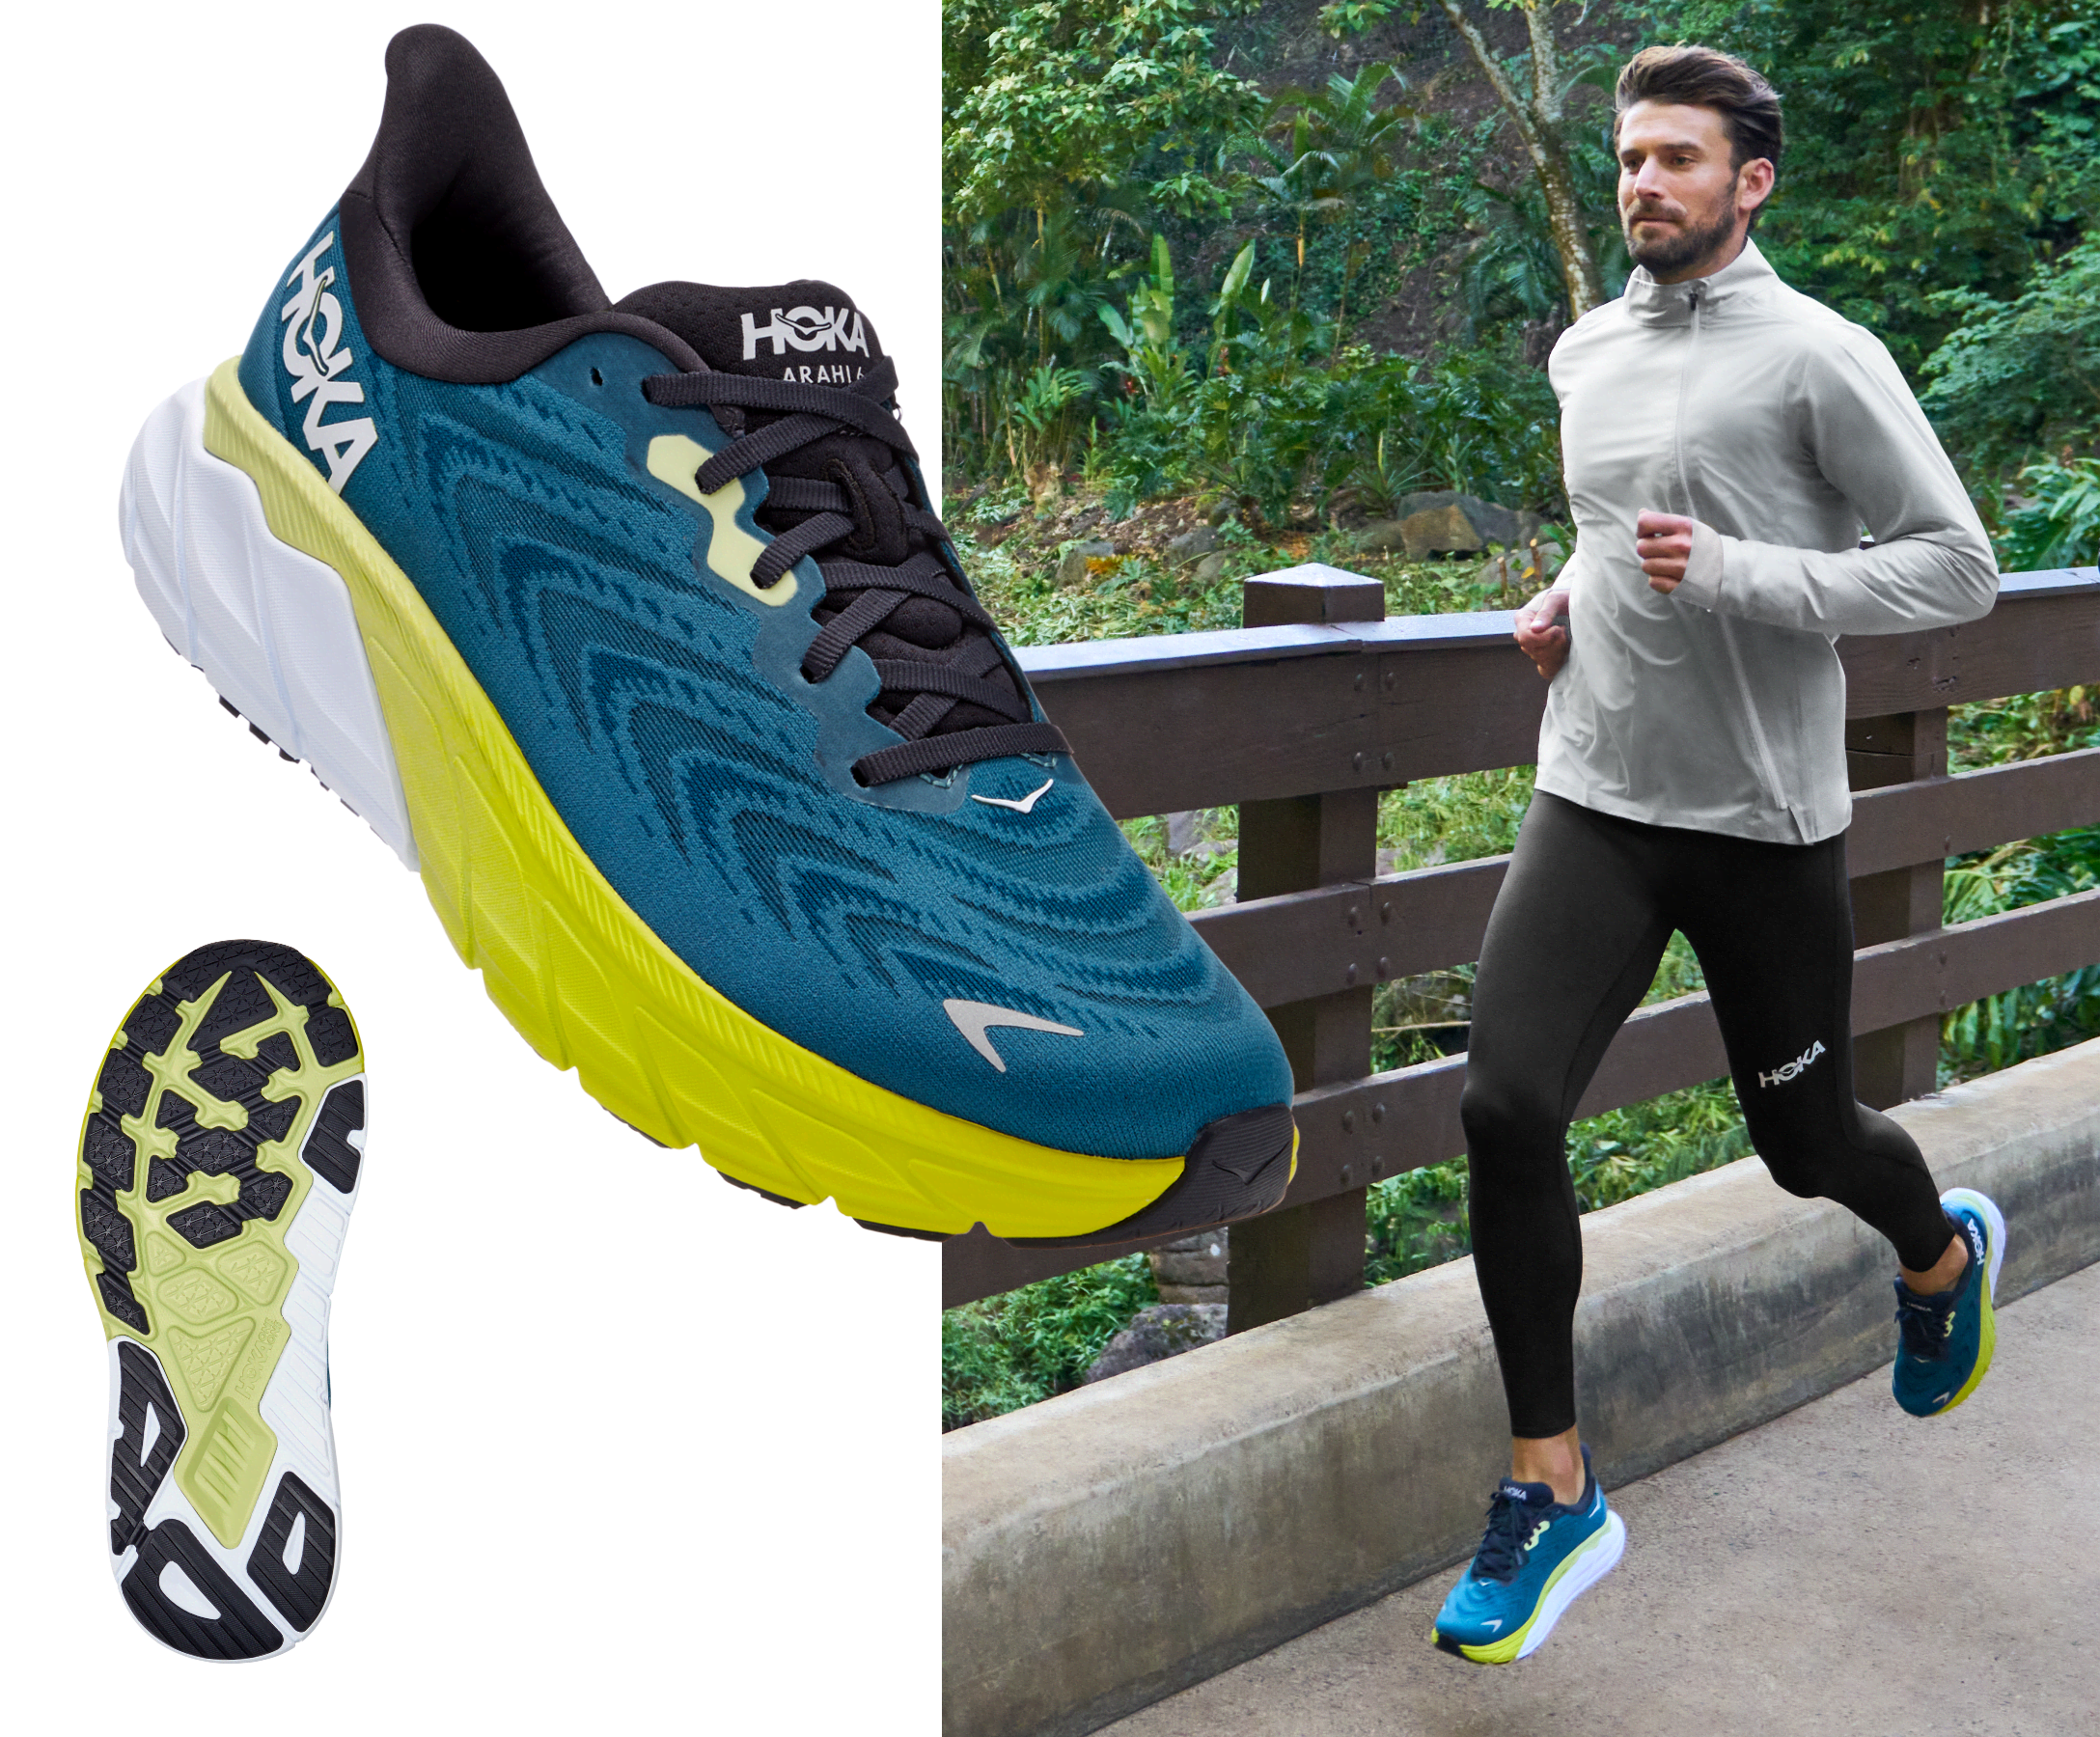 Hoka Arahi 6 Review: The Ultimate Running Shoe or Just Another Hype?